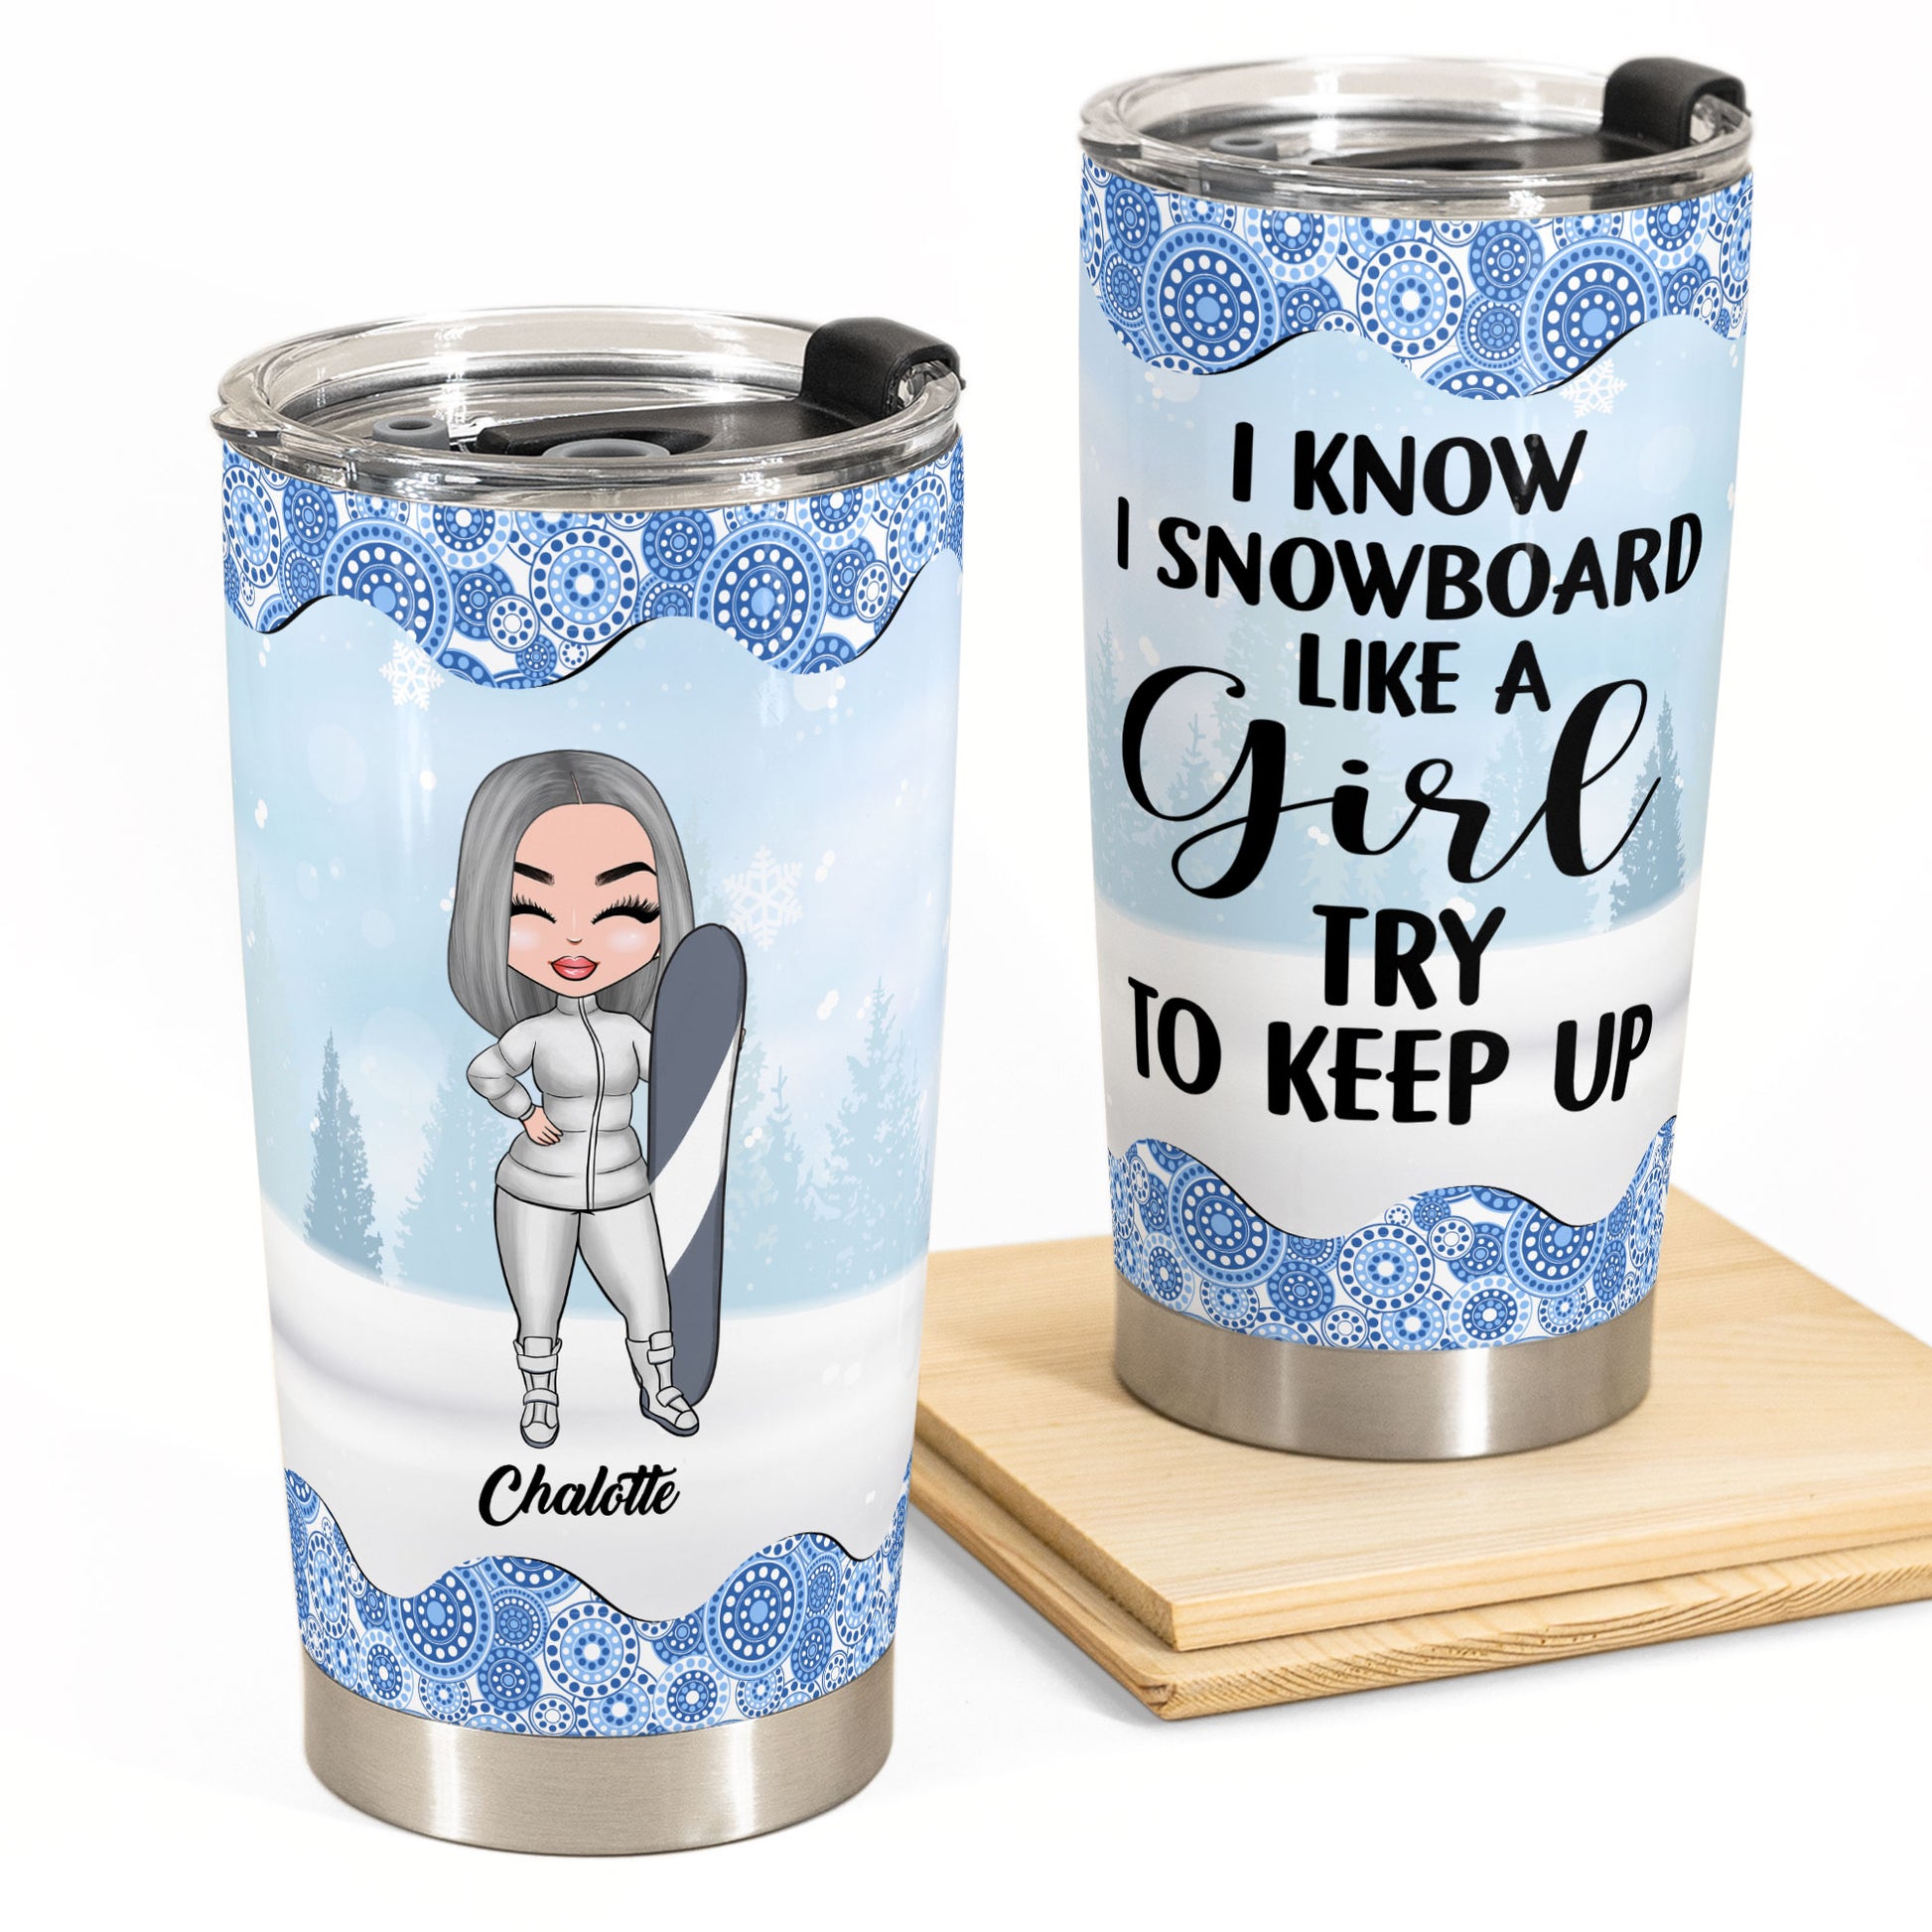 Snowboard Like A Girl Try To Keep Up - Personalized Tumbler Cup - Gift For Snowboarding Lovers